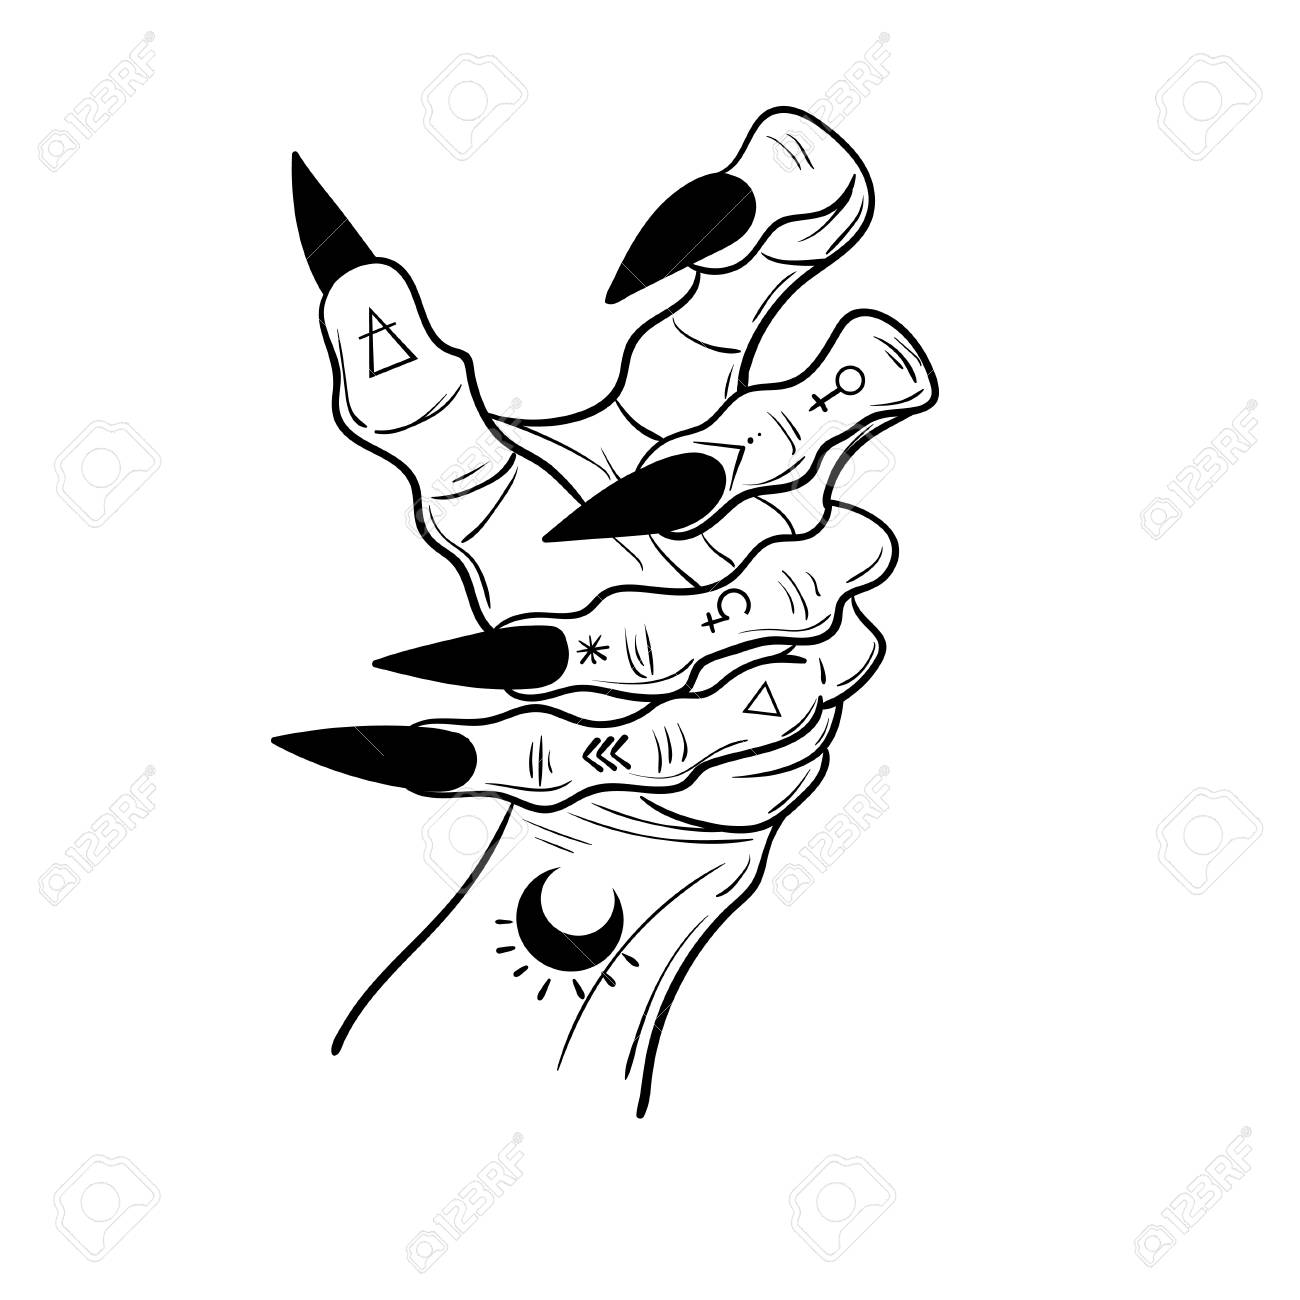 Fingers clipart witch finger. Free claw download clip